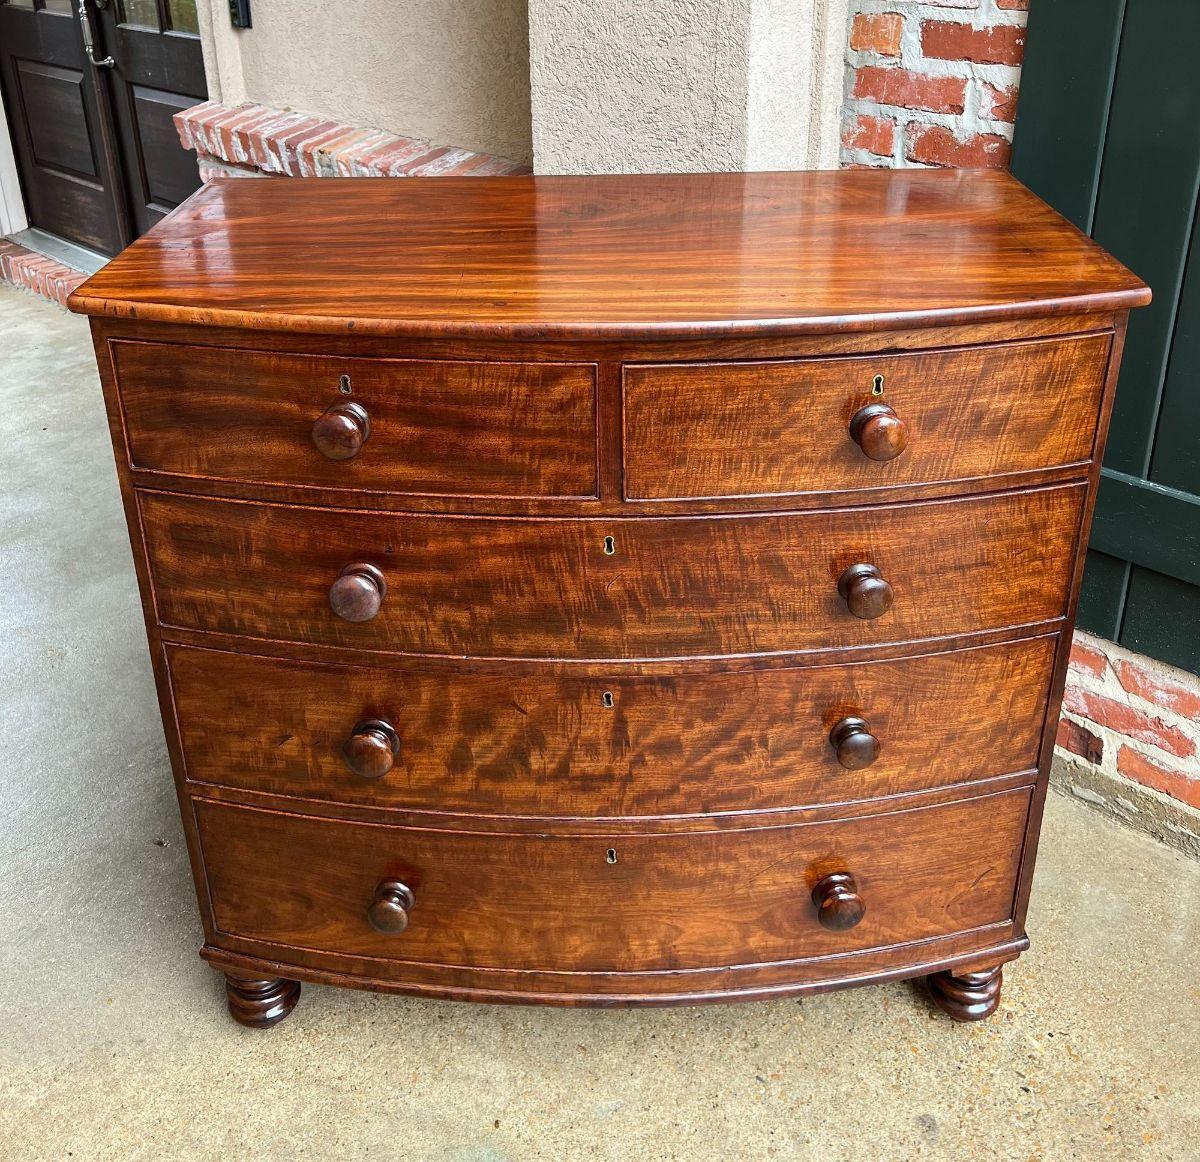 Hand-Crafted 19th Century English Chest of Drawers Bow Front Mahogany Victorian Dresser